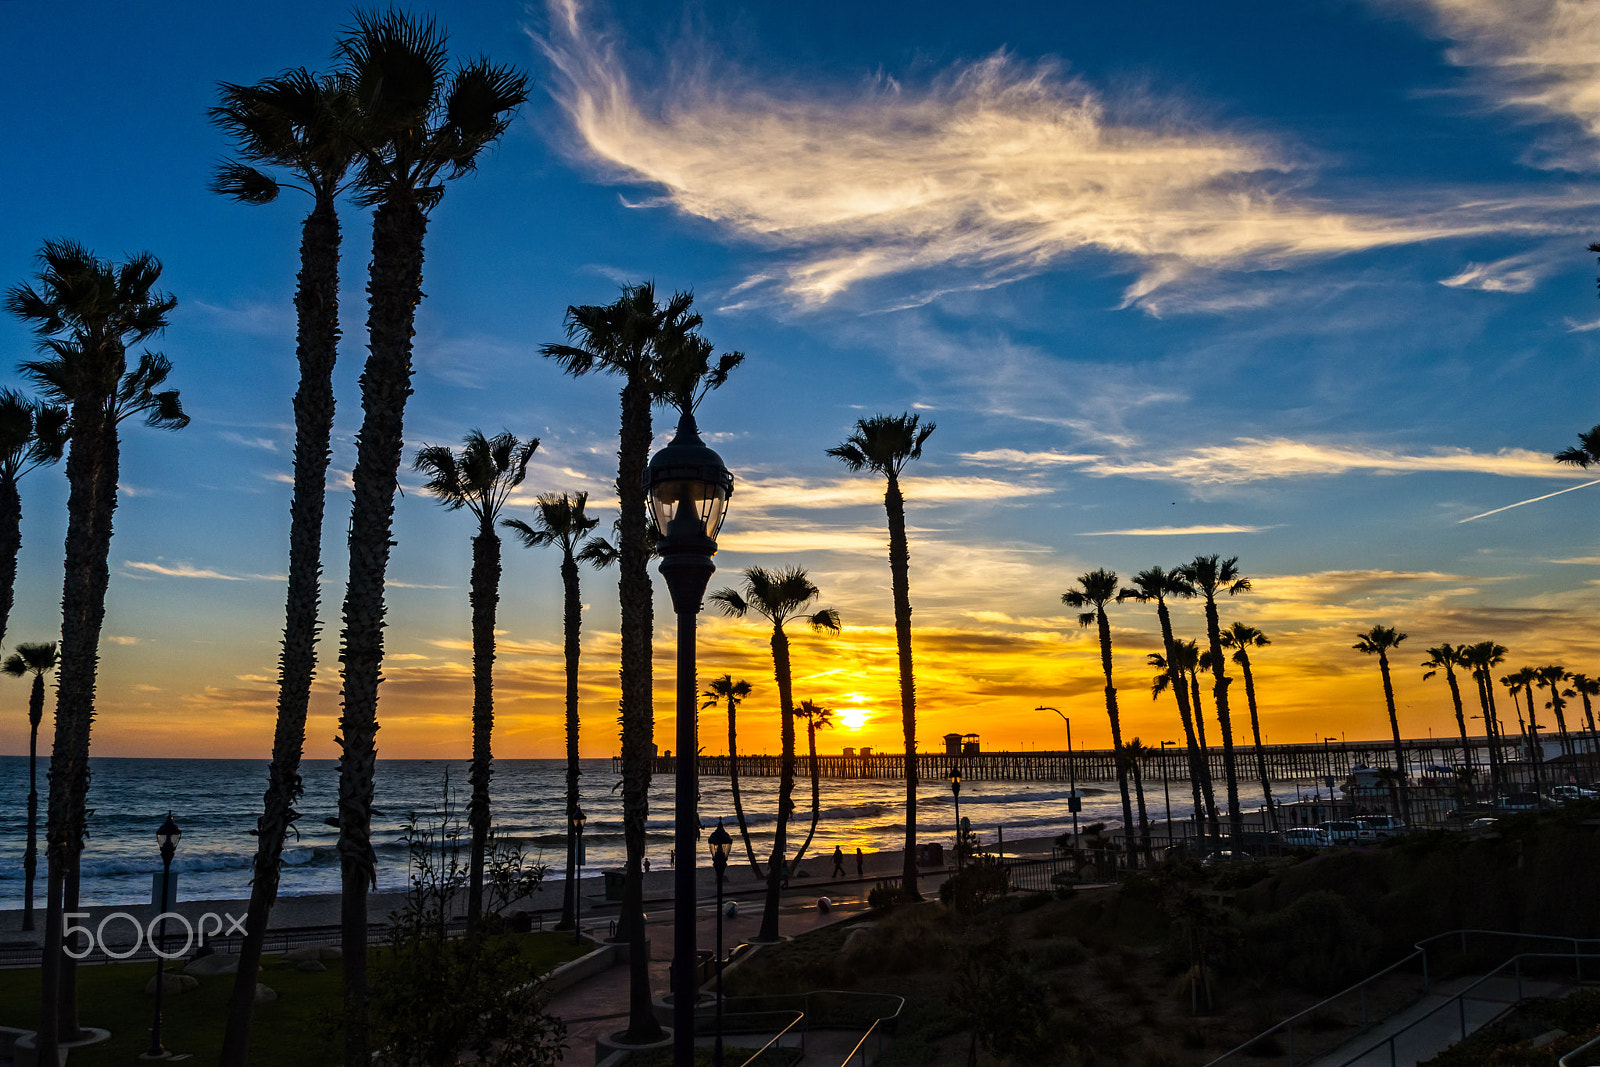 Nikon D500 sample photo. Sunset in oceanside - march 24, 2017 photography